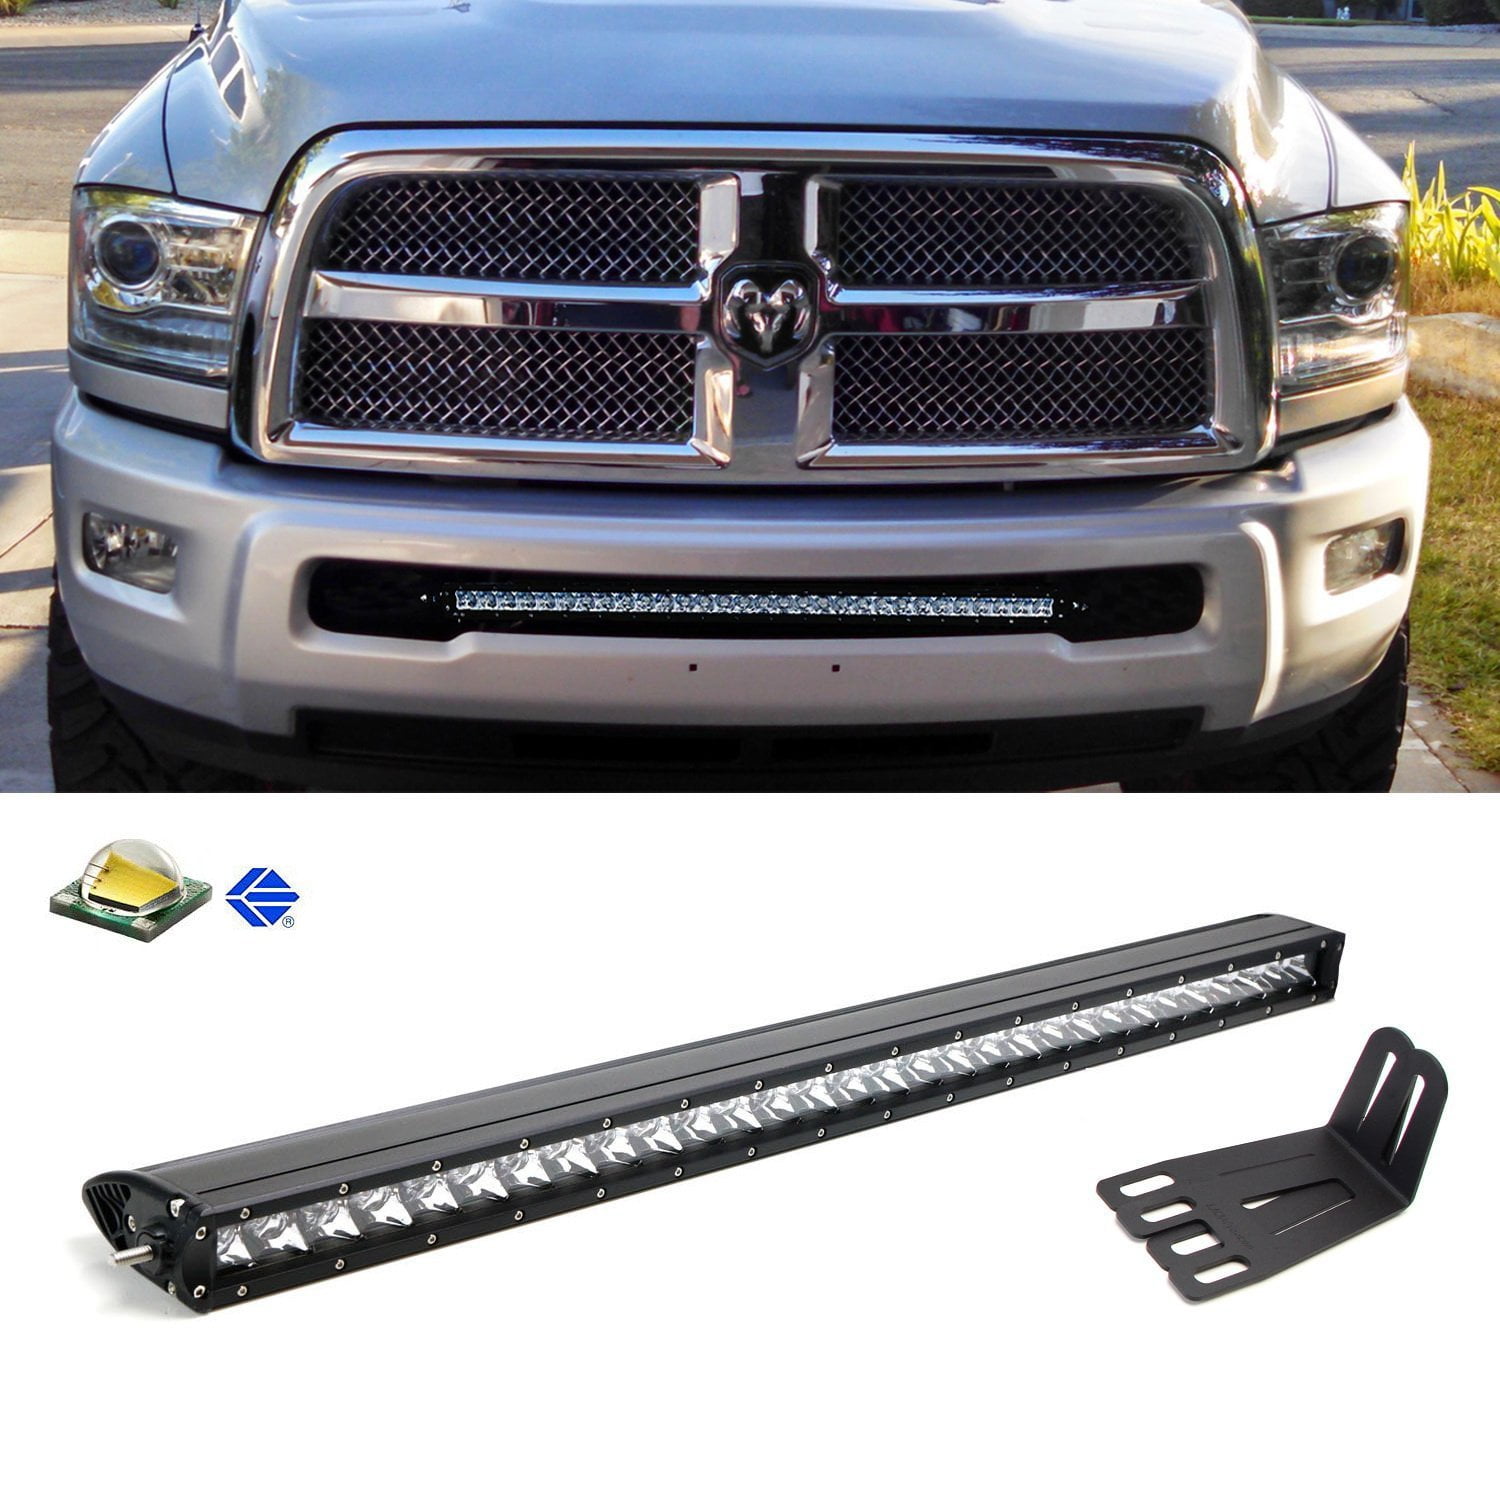 1 120W High Power LED Lightbar iJDMTOY Lower Grille 20 LED Light Bar Kit For 2009-18 Dodge RAM 2500 3500 HD Lower Bumper Opening Mounting Brackets & On/Off Switch Wiring Kit iJDMTOY Auto Accessories 21.5 Inch Double Row Straight LED Bar Includes